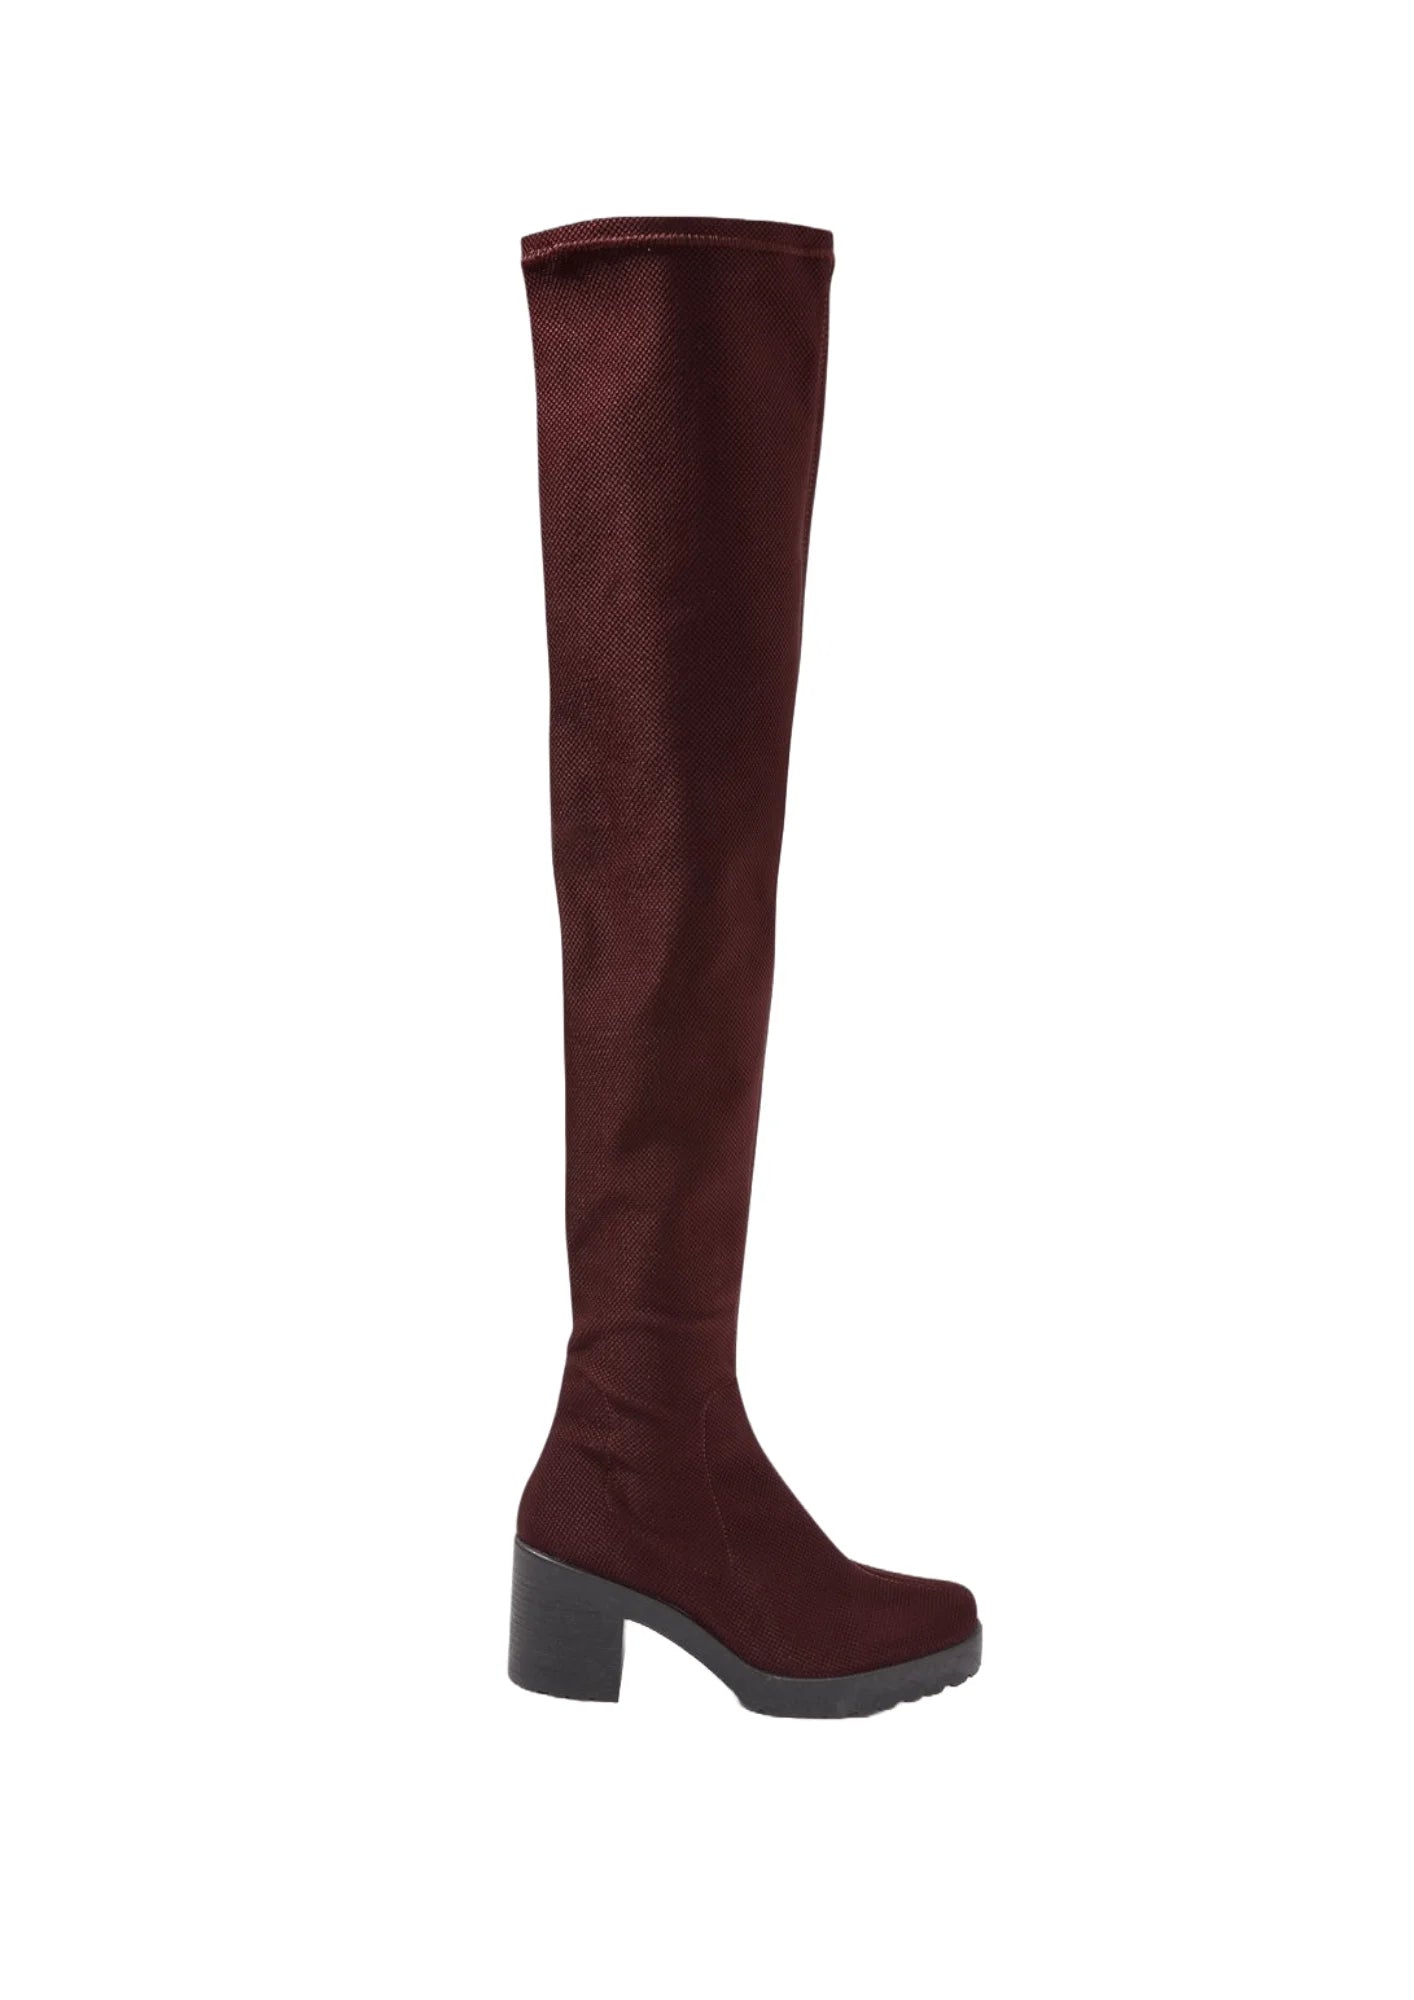 BURGUNDY OVER-THE-KNEE BOOTS